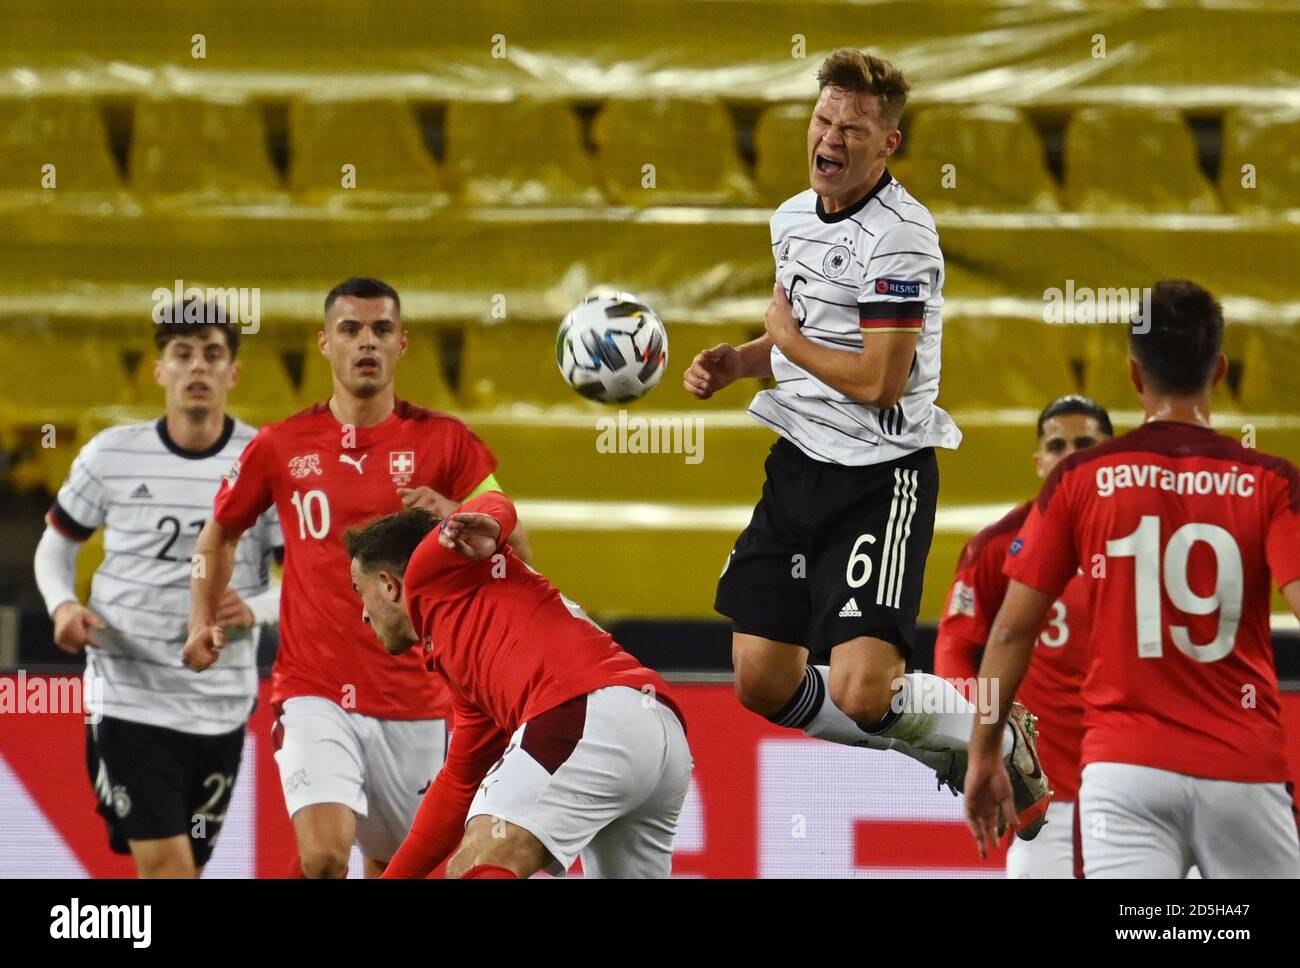 Cologne, Germany. 13th Oct, 2020. Football: Nations League A, Germany -  Switzerland, group stage, group 4, 4th matchday at the RheinEnergieStadion.  Germany's Joshua Kimmich (r) and the Swiss Xherdan Shaqiri fight for